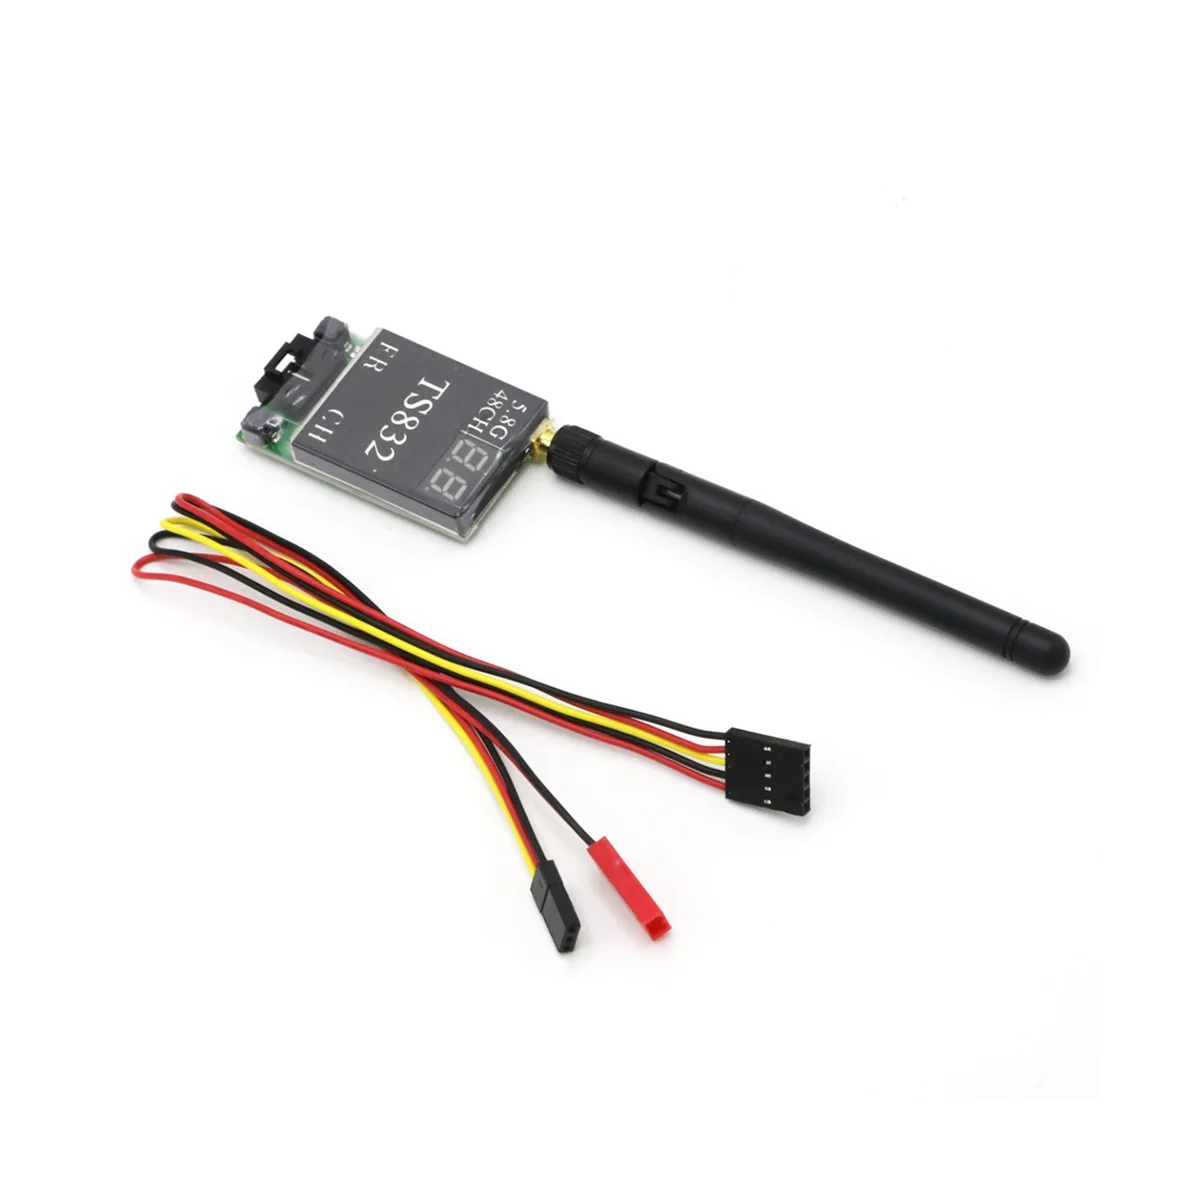 

48Ch 5.8G 600Mw 5Km Wireless AV Transmitter TS832 Receiver RC832 for FPV Multicopter RC Aircraft Quadcopter(A)